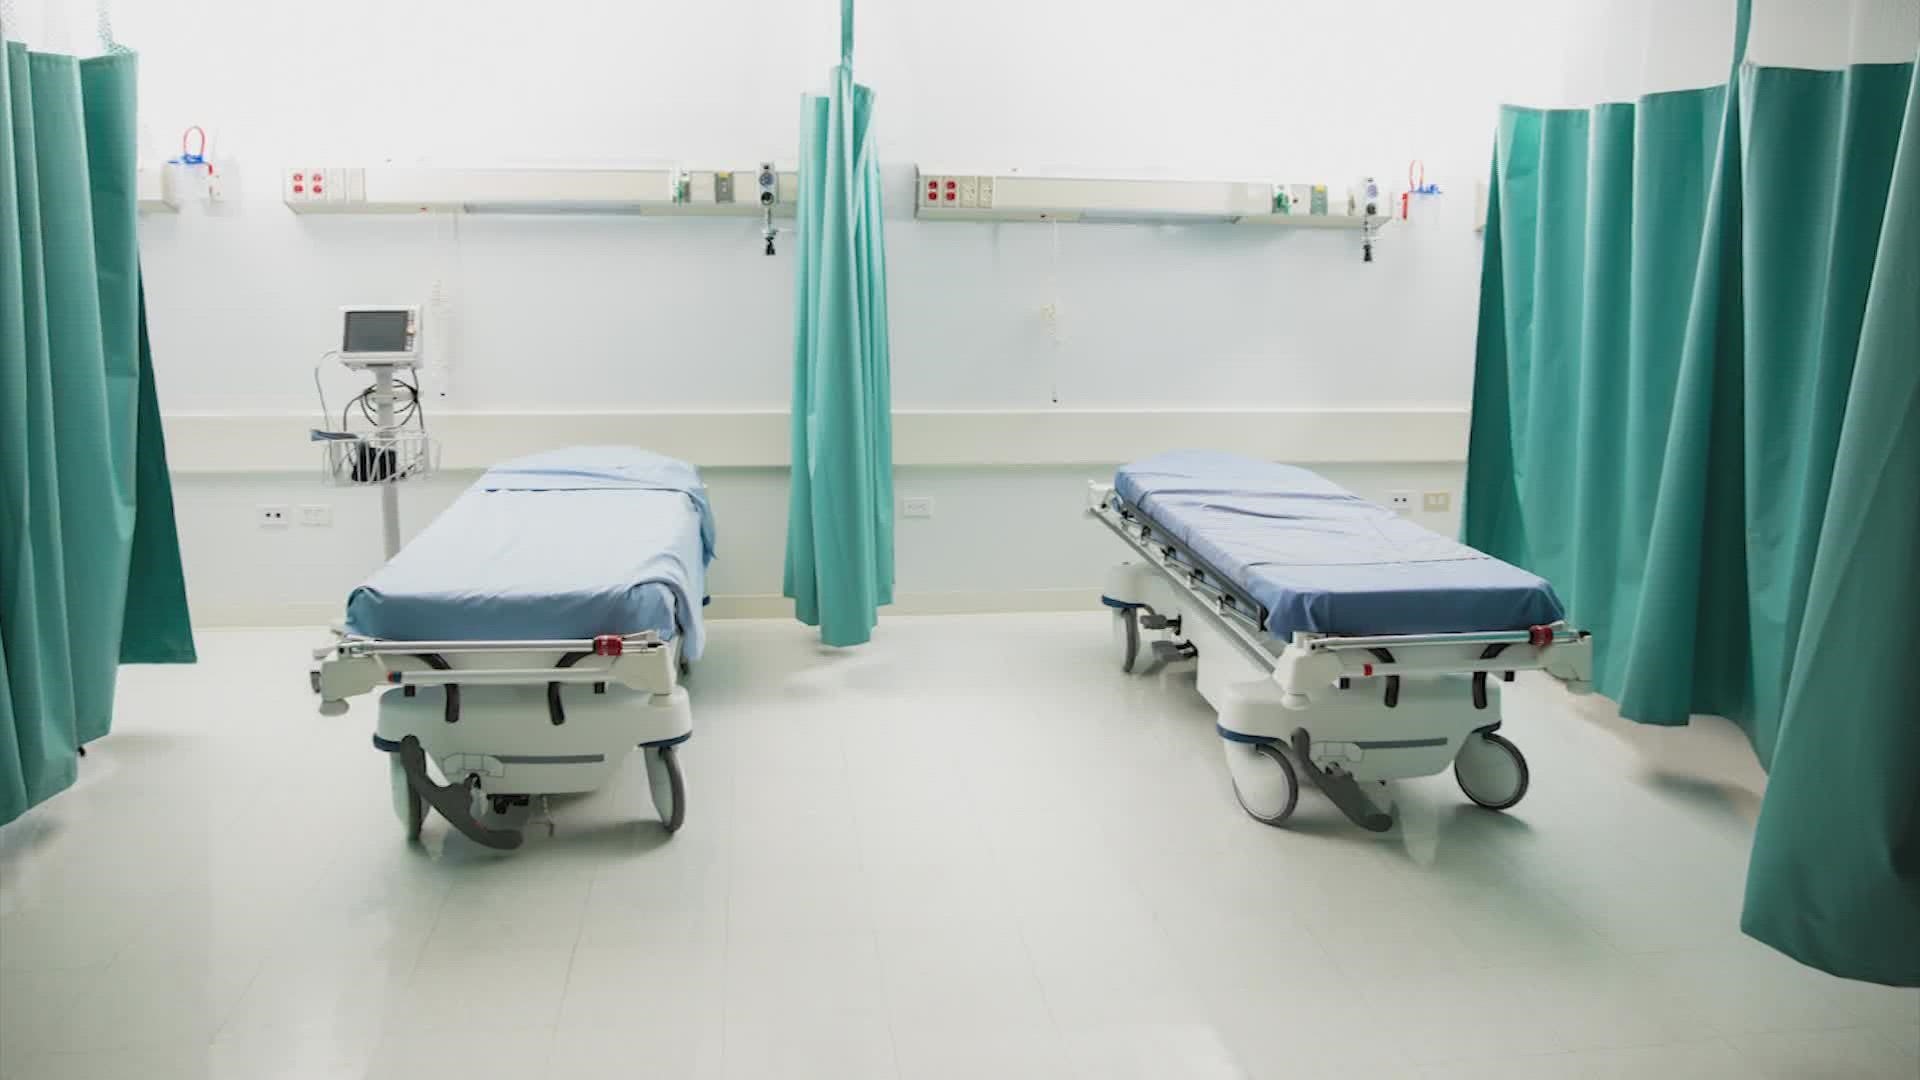 There is ample bed space, but hospital officials said staffing shortages are making it hard to deal with the influx of patients.